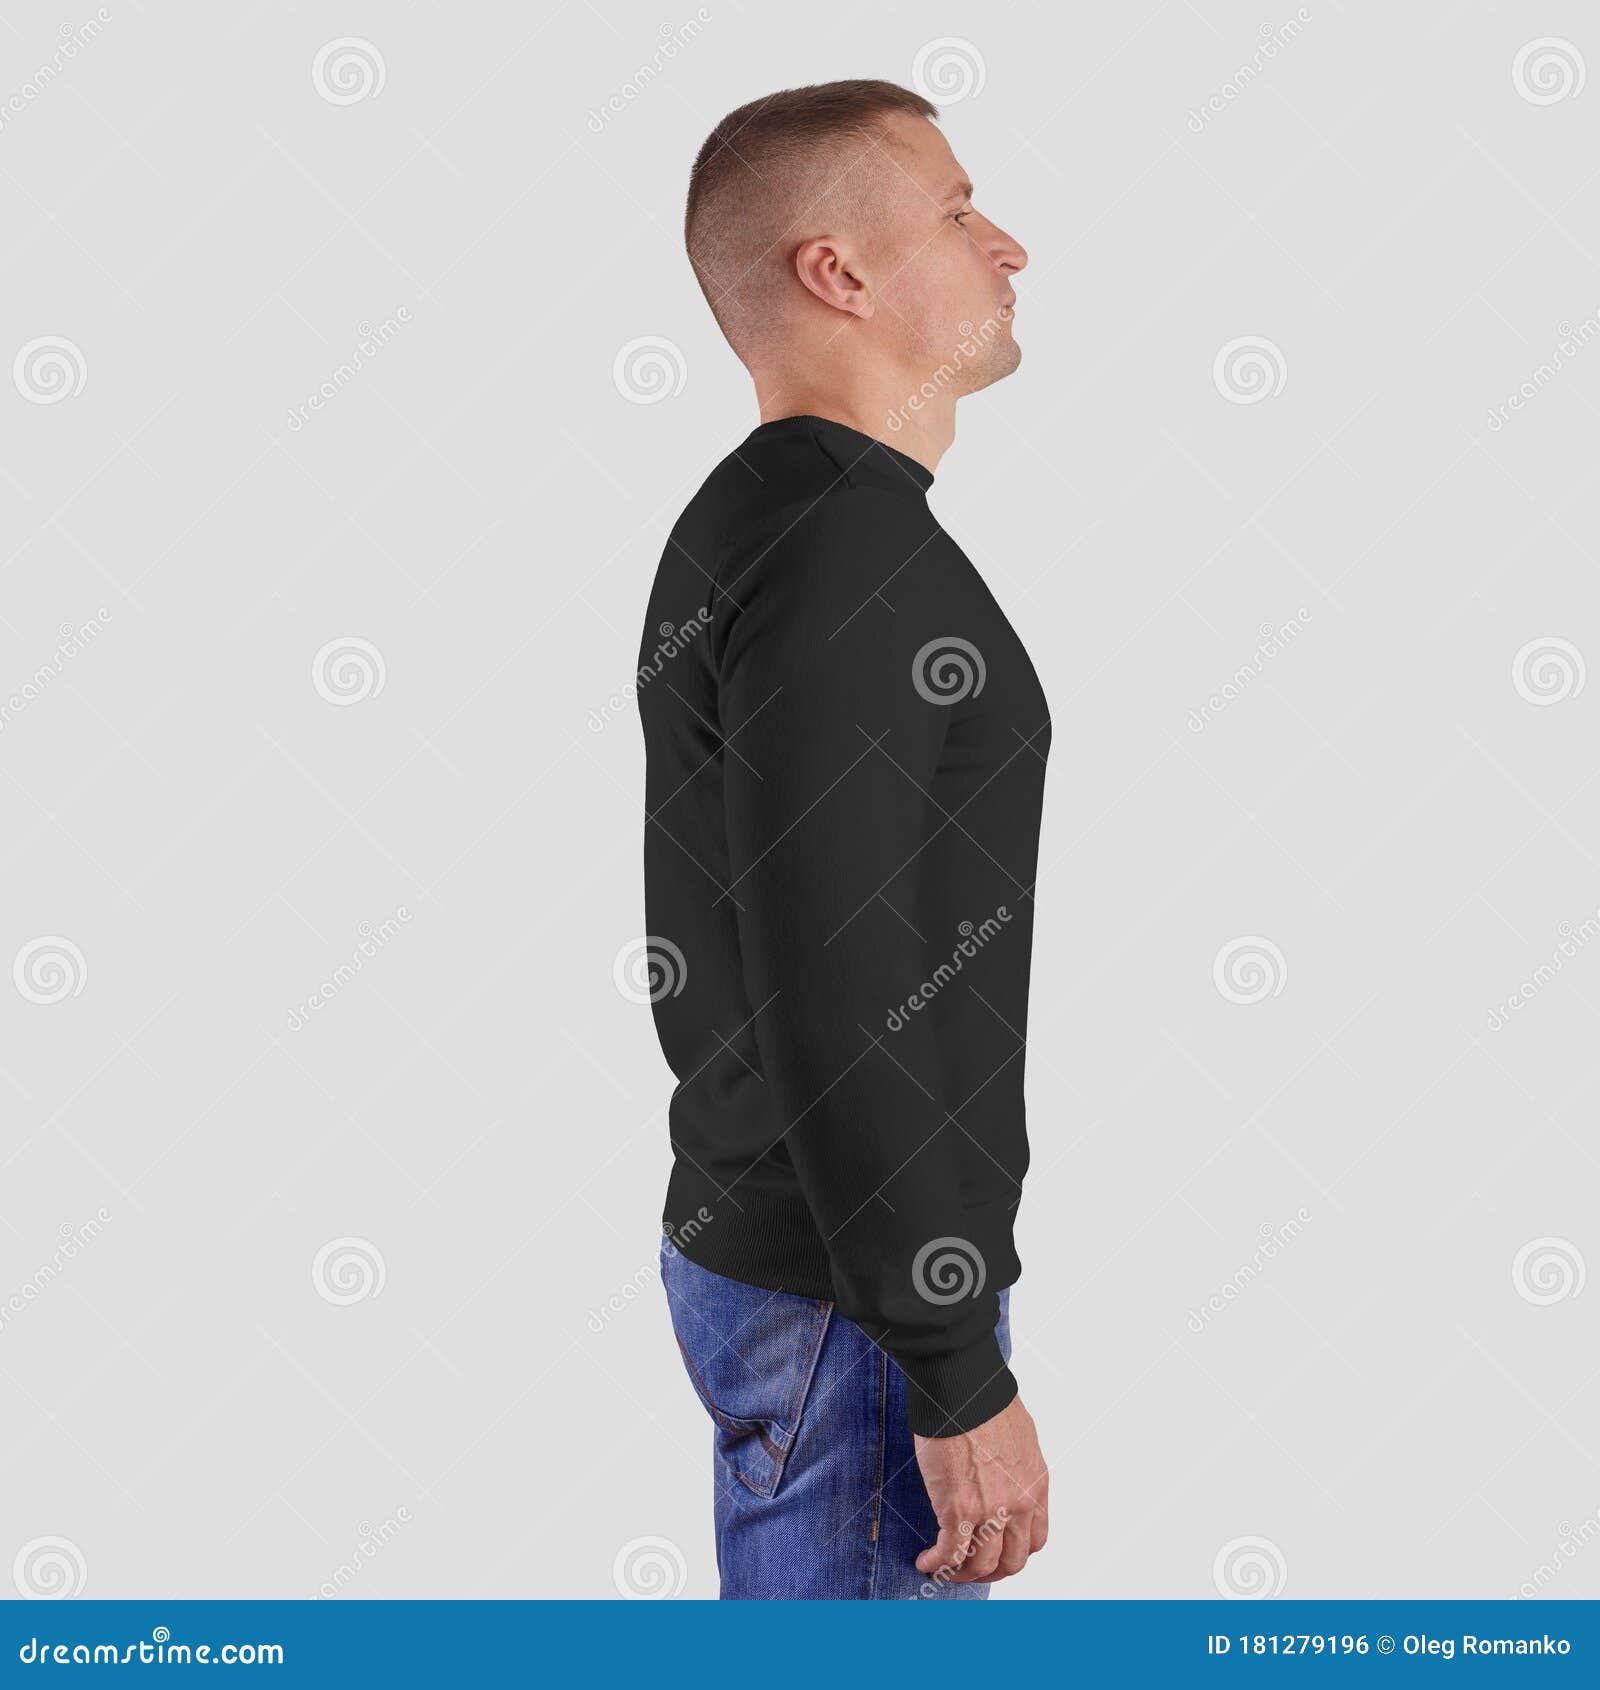 Download Mockup Of Black Long-sleeved Clothing On A Man In Blue ...